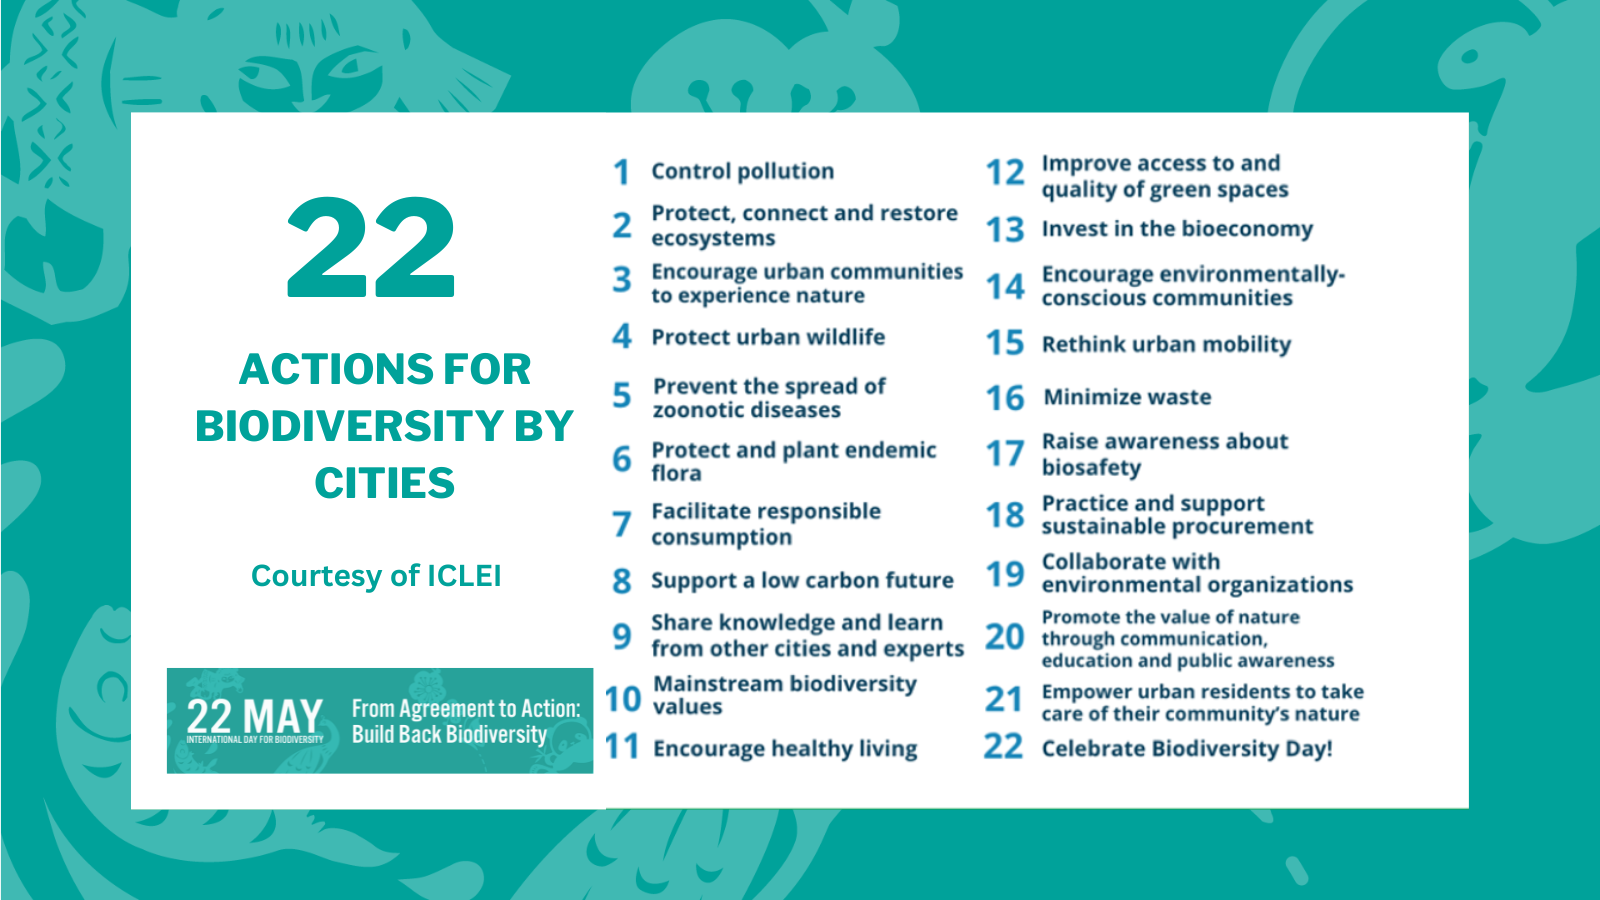 IDB 2023 - 22 actions for biodiversity by cities (courtesy of ICLEI)